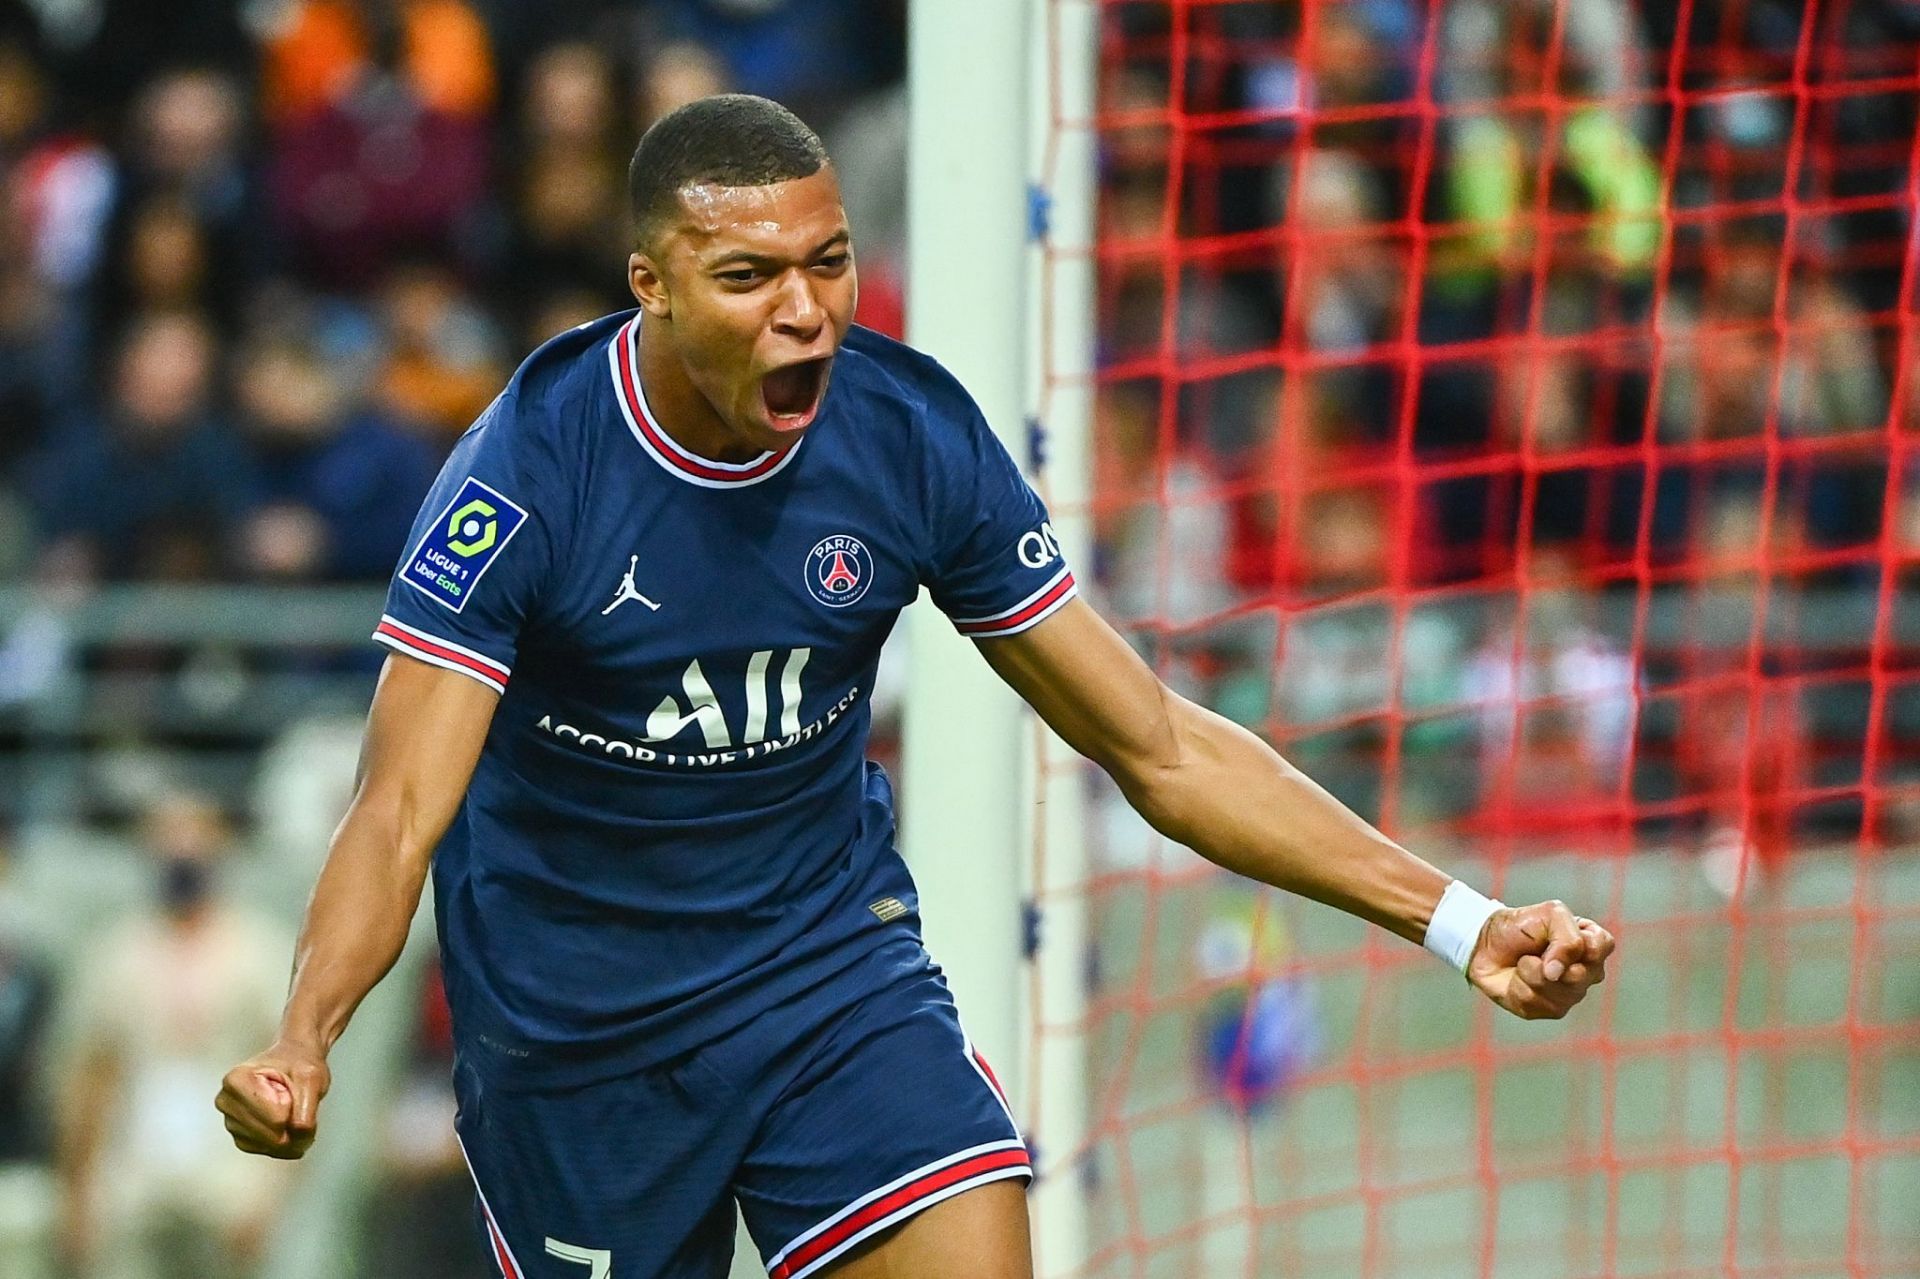 Mbappe scored against Barcelona, Bayern, Leipzig and City in the Champions League in 2021.